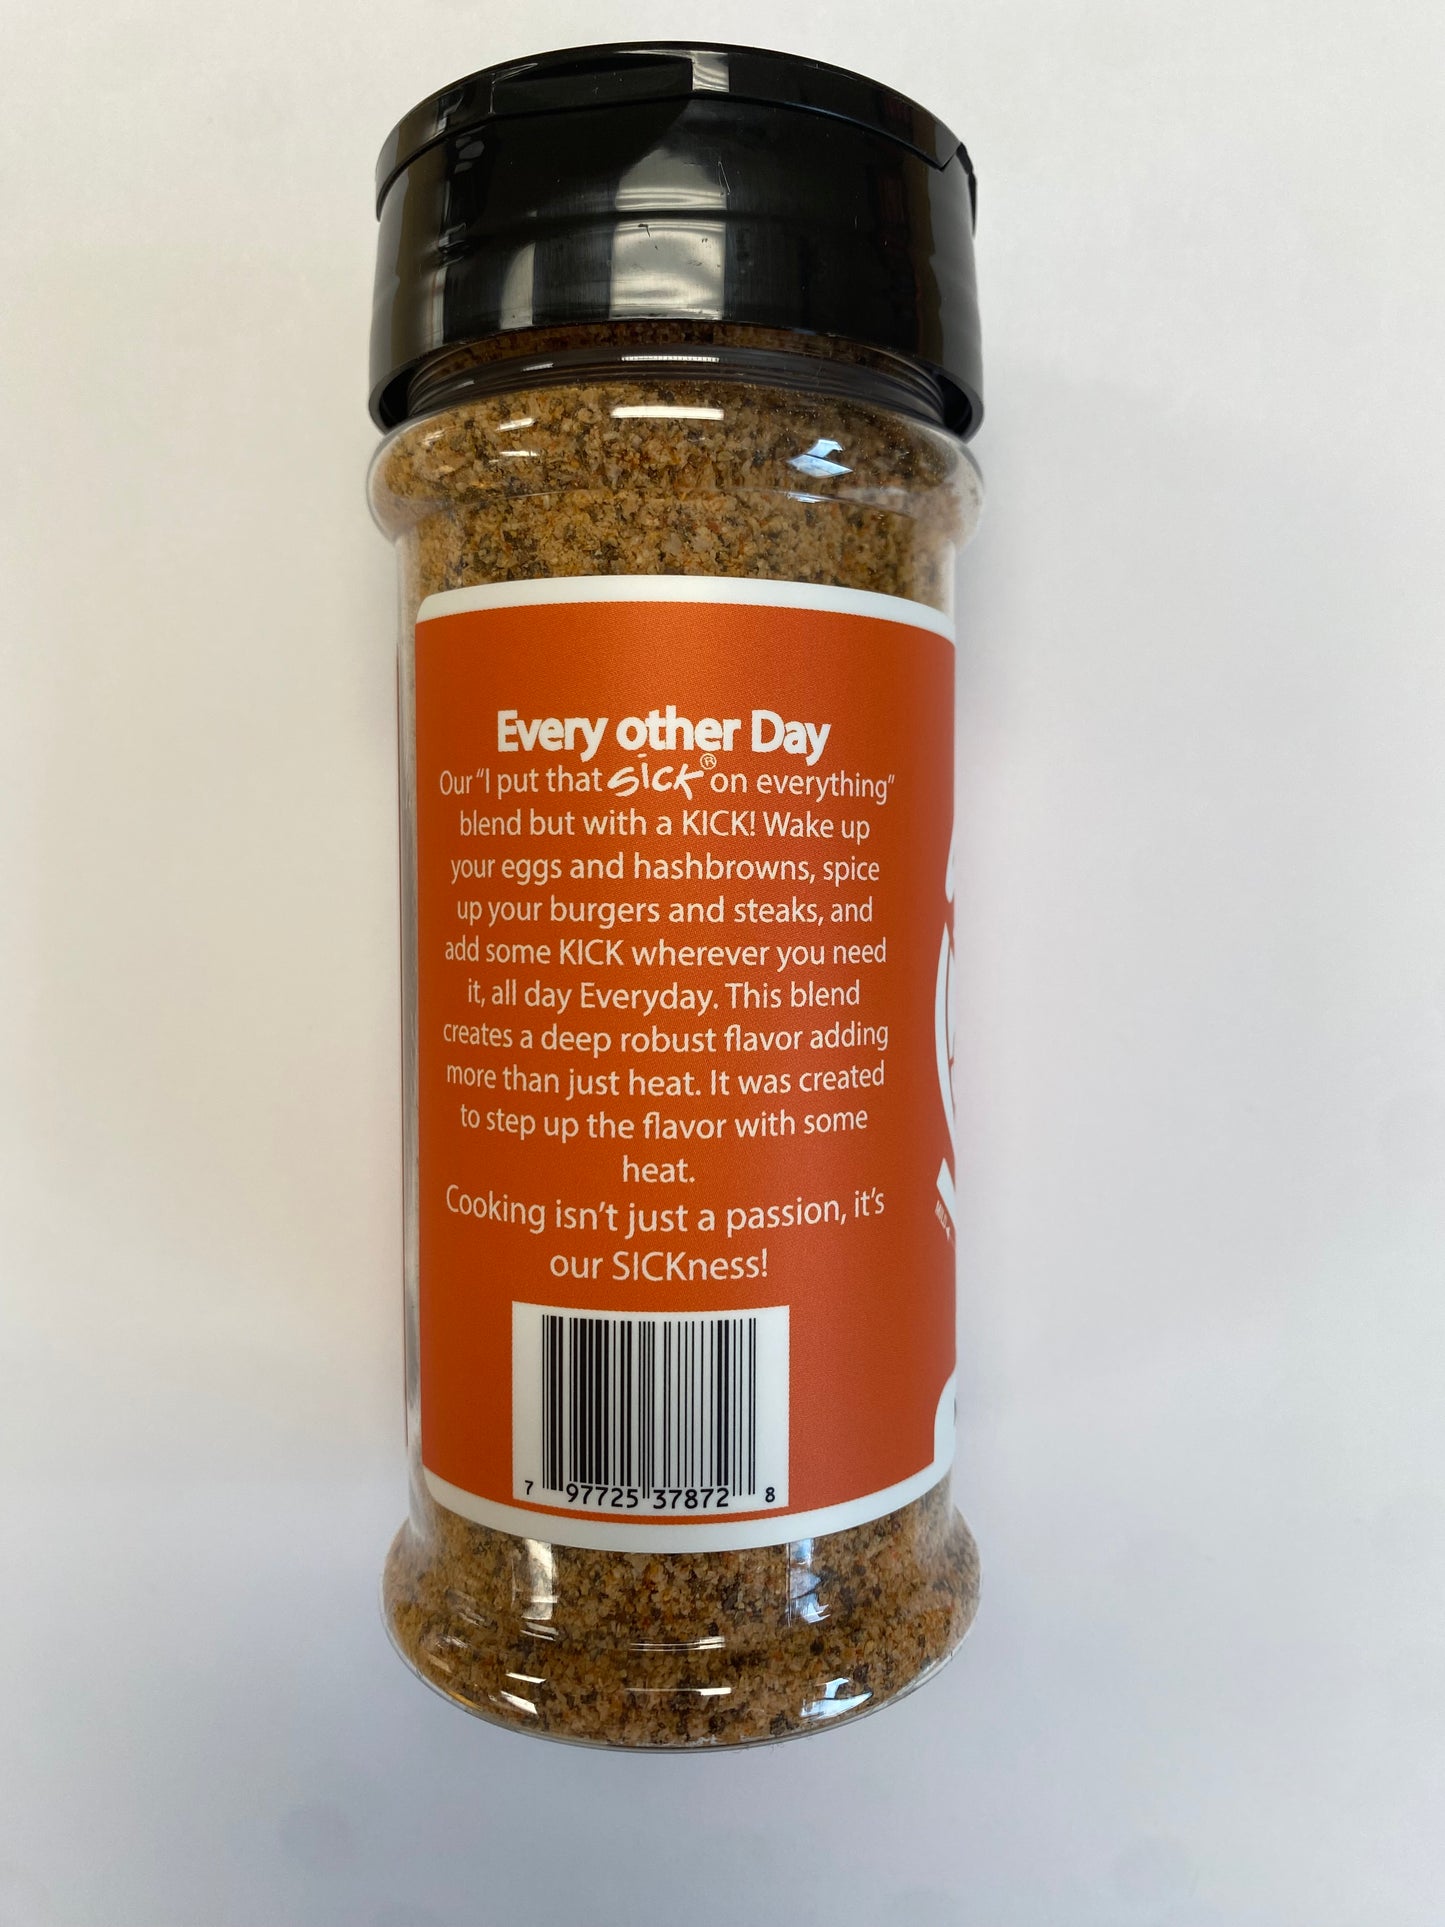 "Every Other Day" Sick Spice